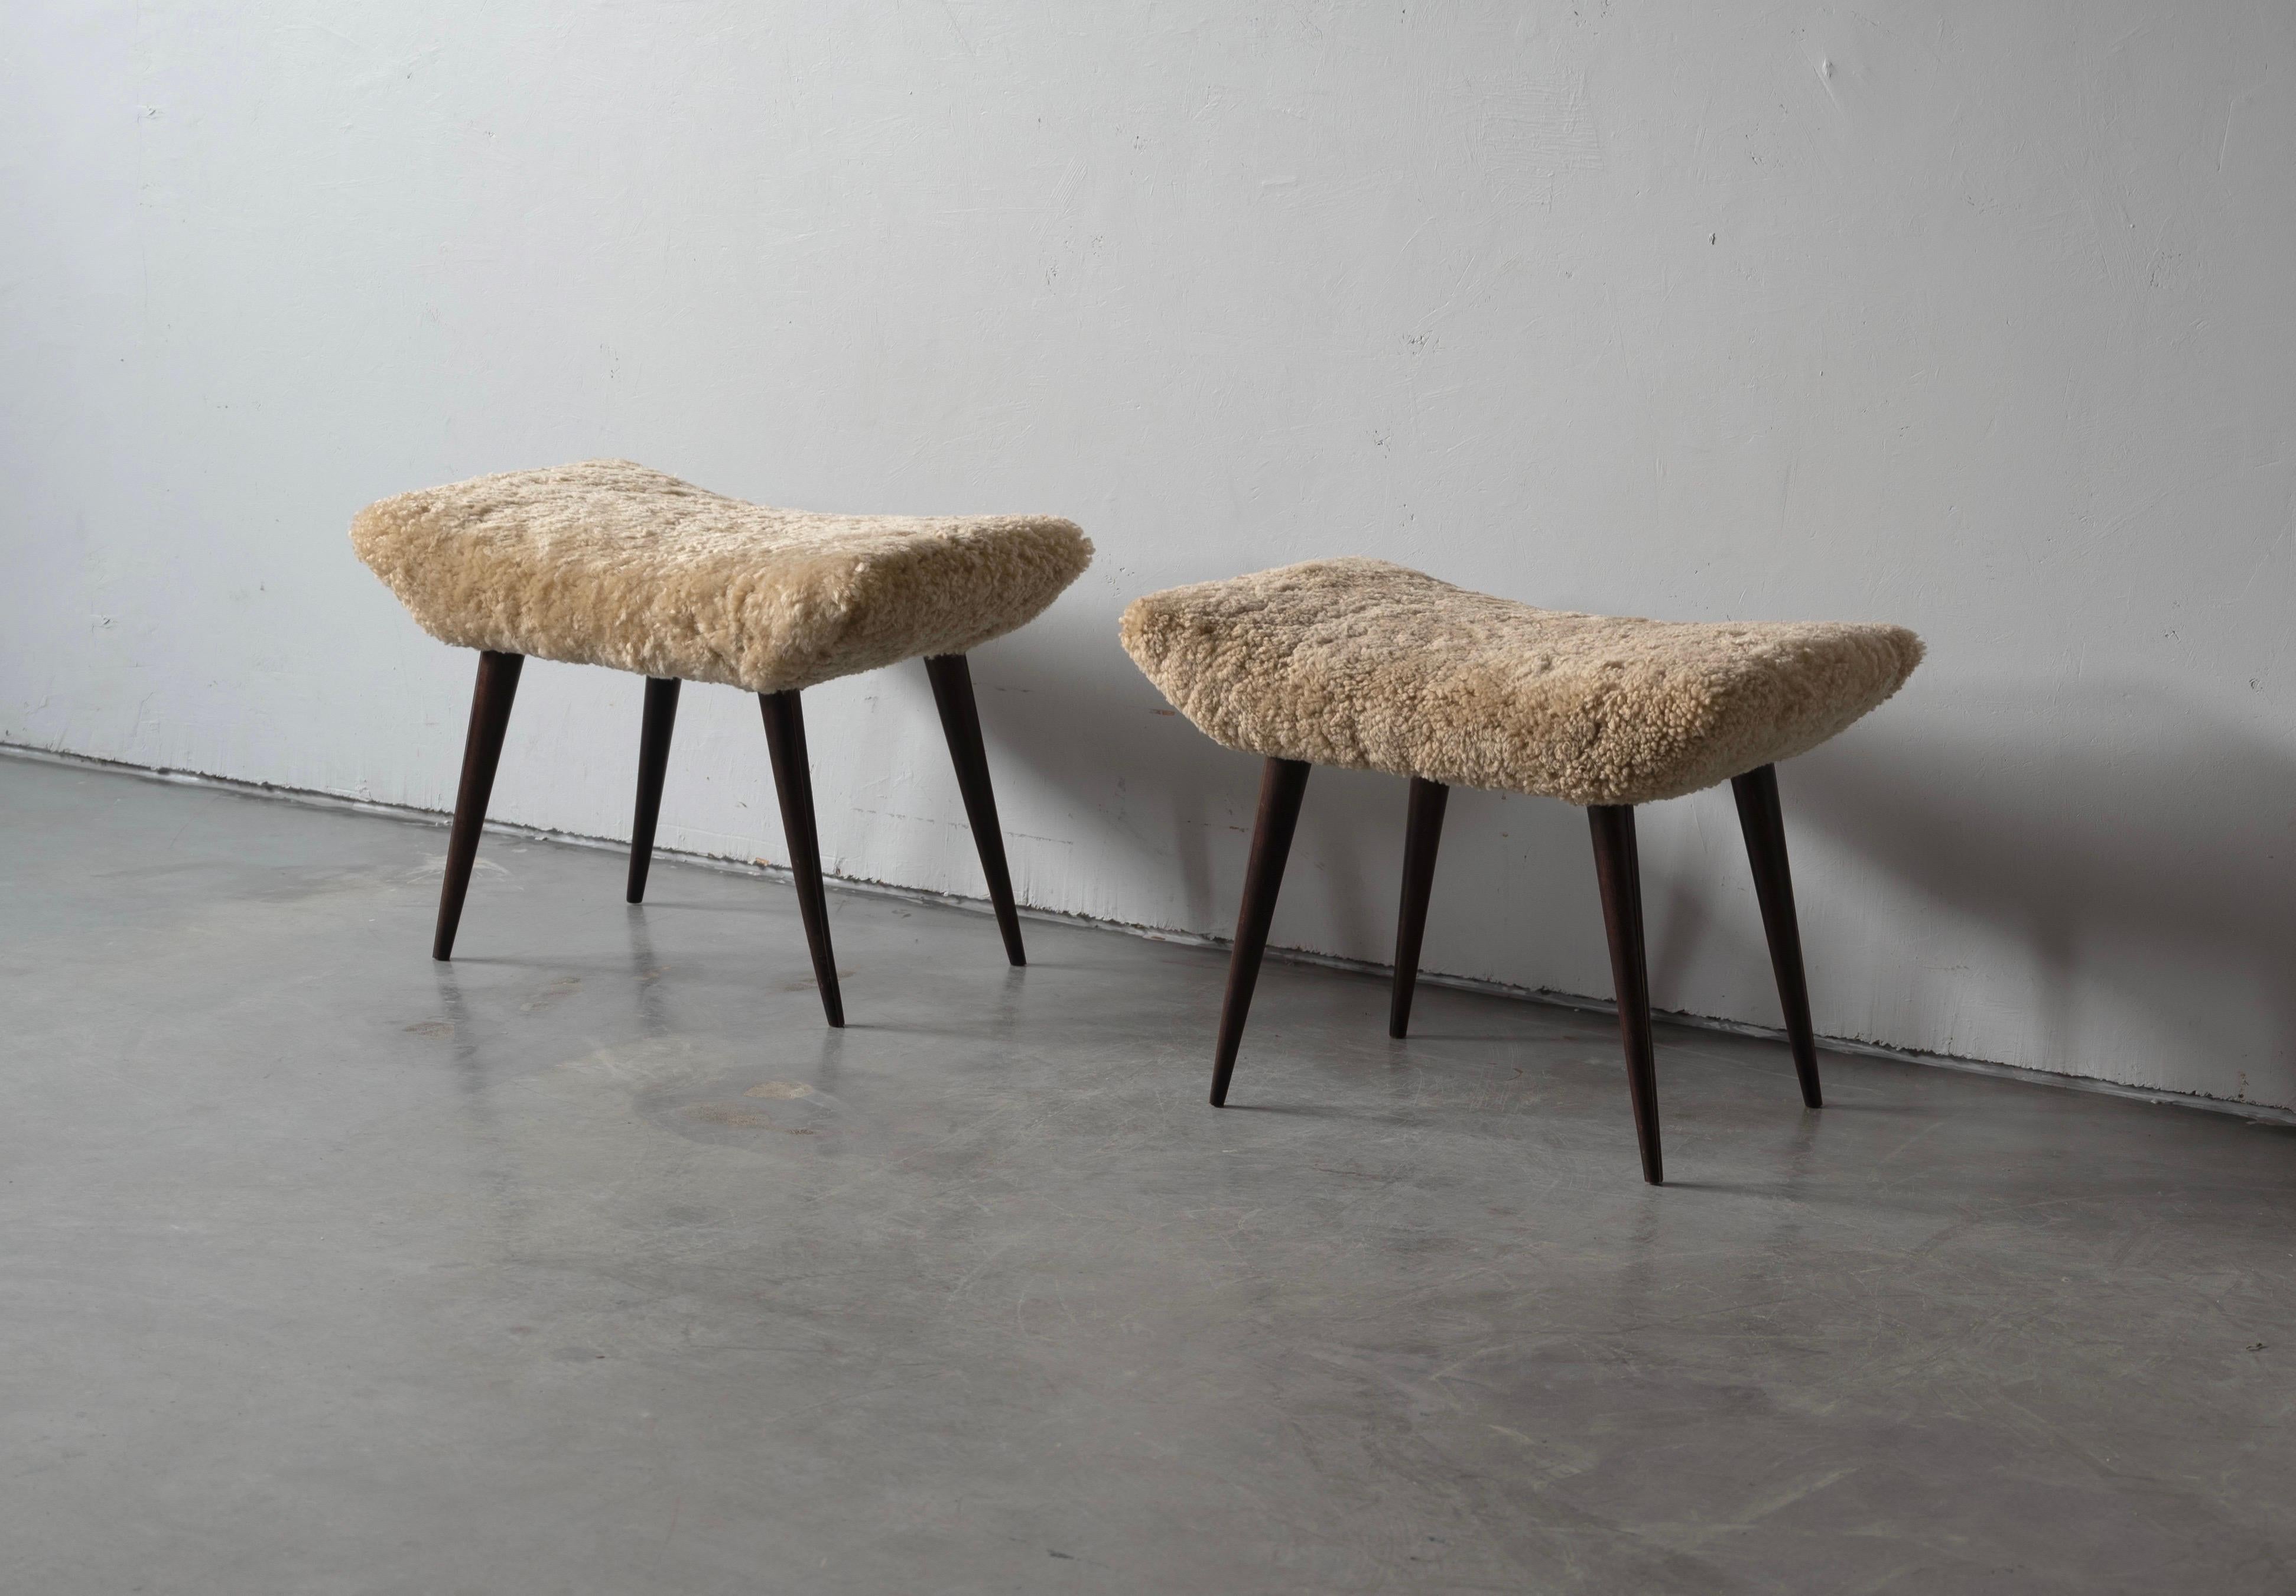 A pair of organic stools in stained walnut, overstuffed seat reupholstered in brand new sheepskin upholstery. Produced in Italy, 1940s-1950s.

Other designers of the period include Finn Juhl, Hans Wegner, Isamu Noguchi, Charlotte Perriand.